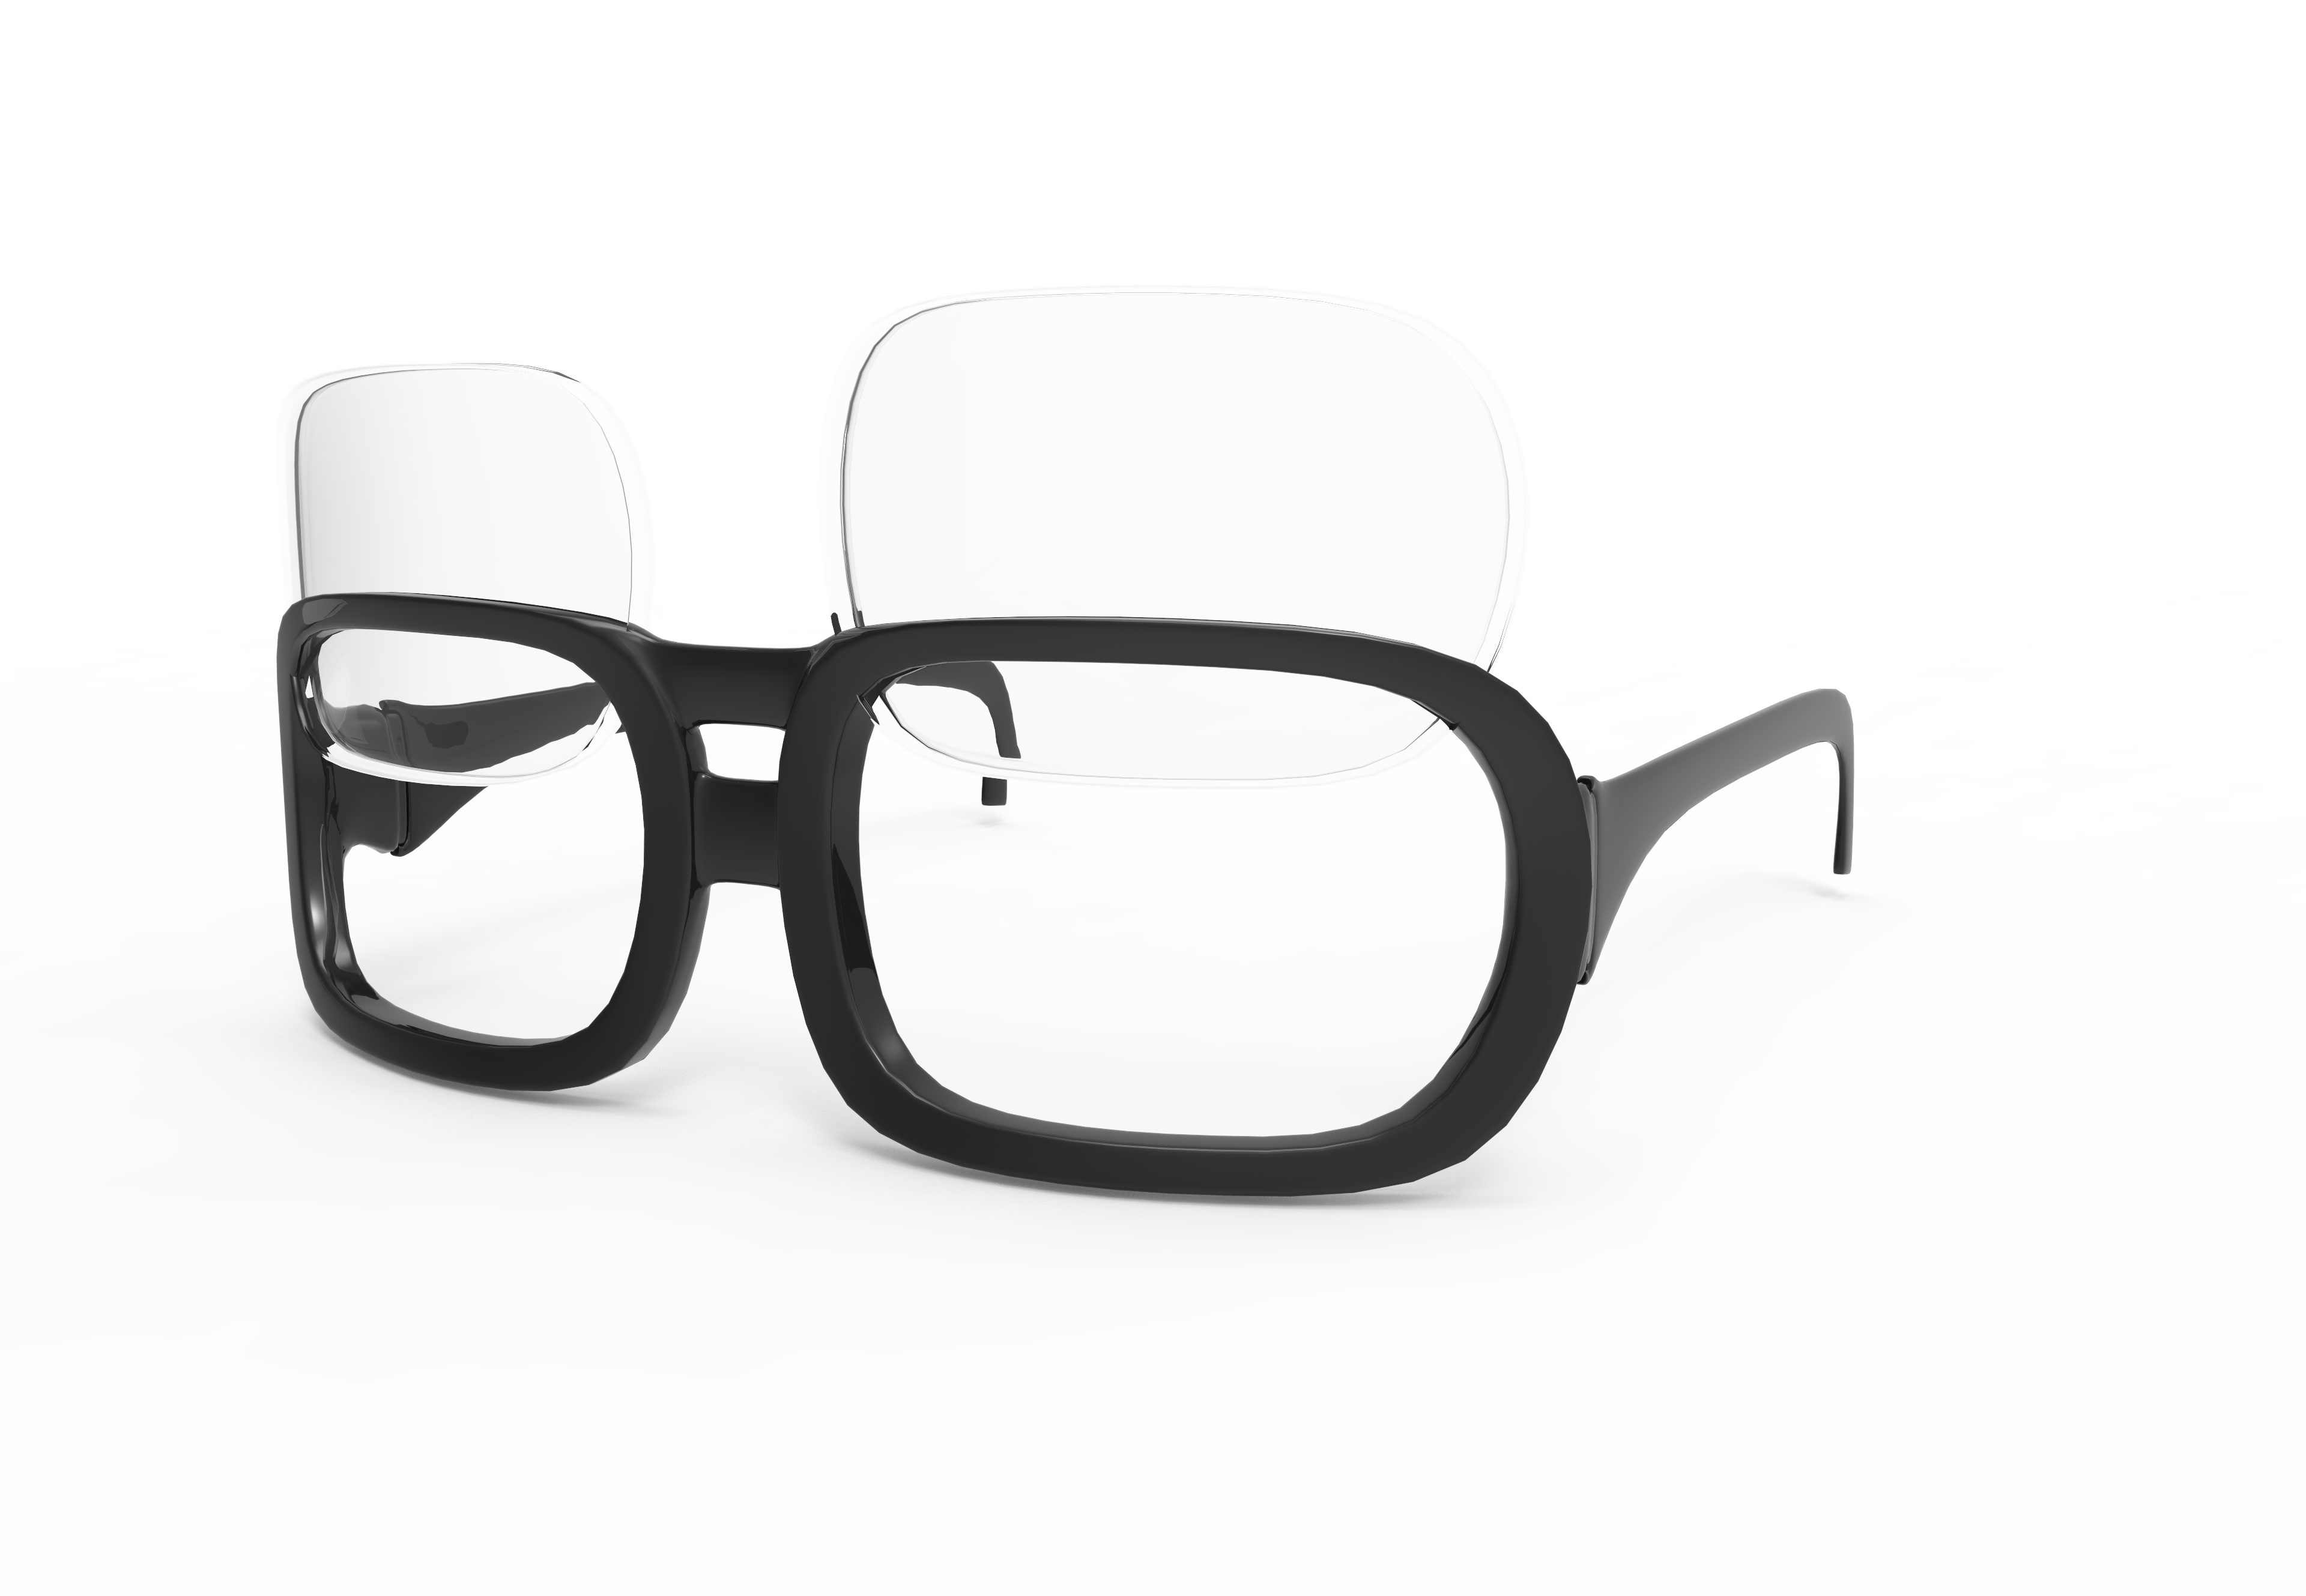 With this new and unique invention, people will now be able to match their eyeglass frames to the outfit that they have on.